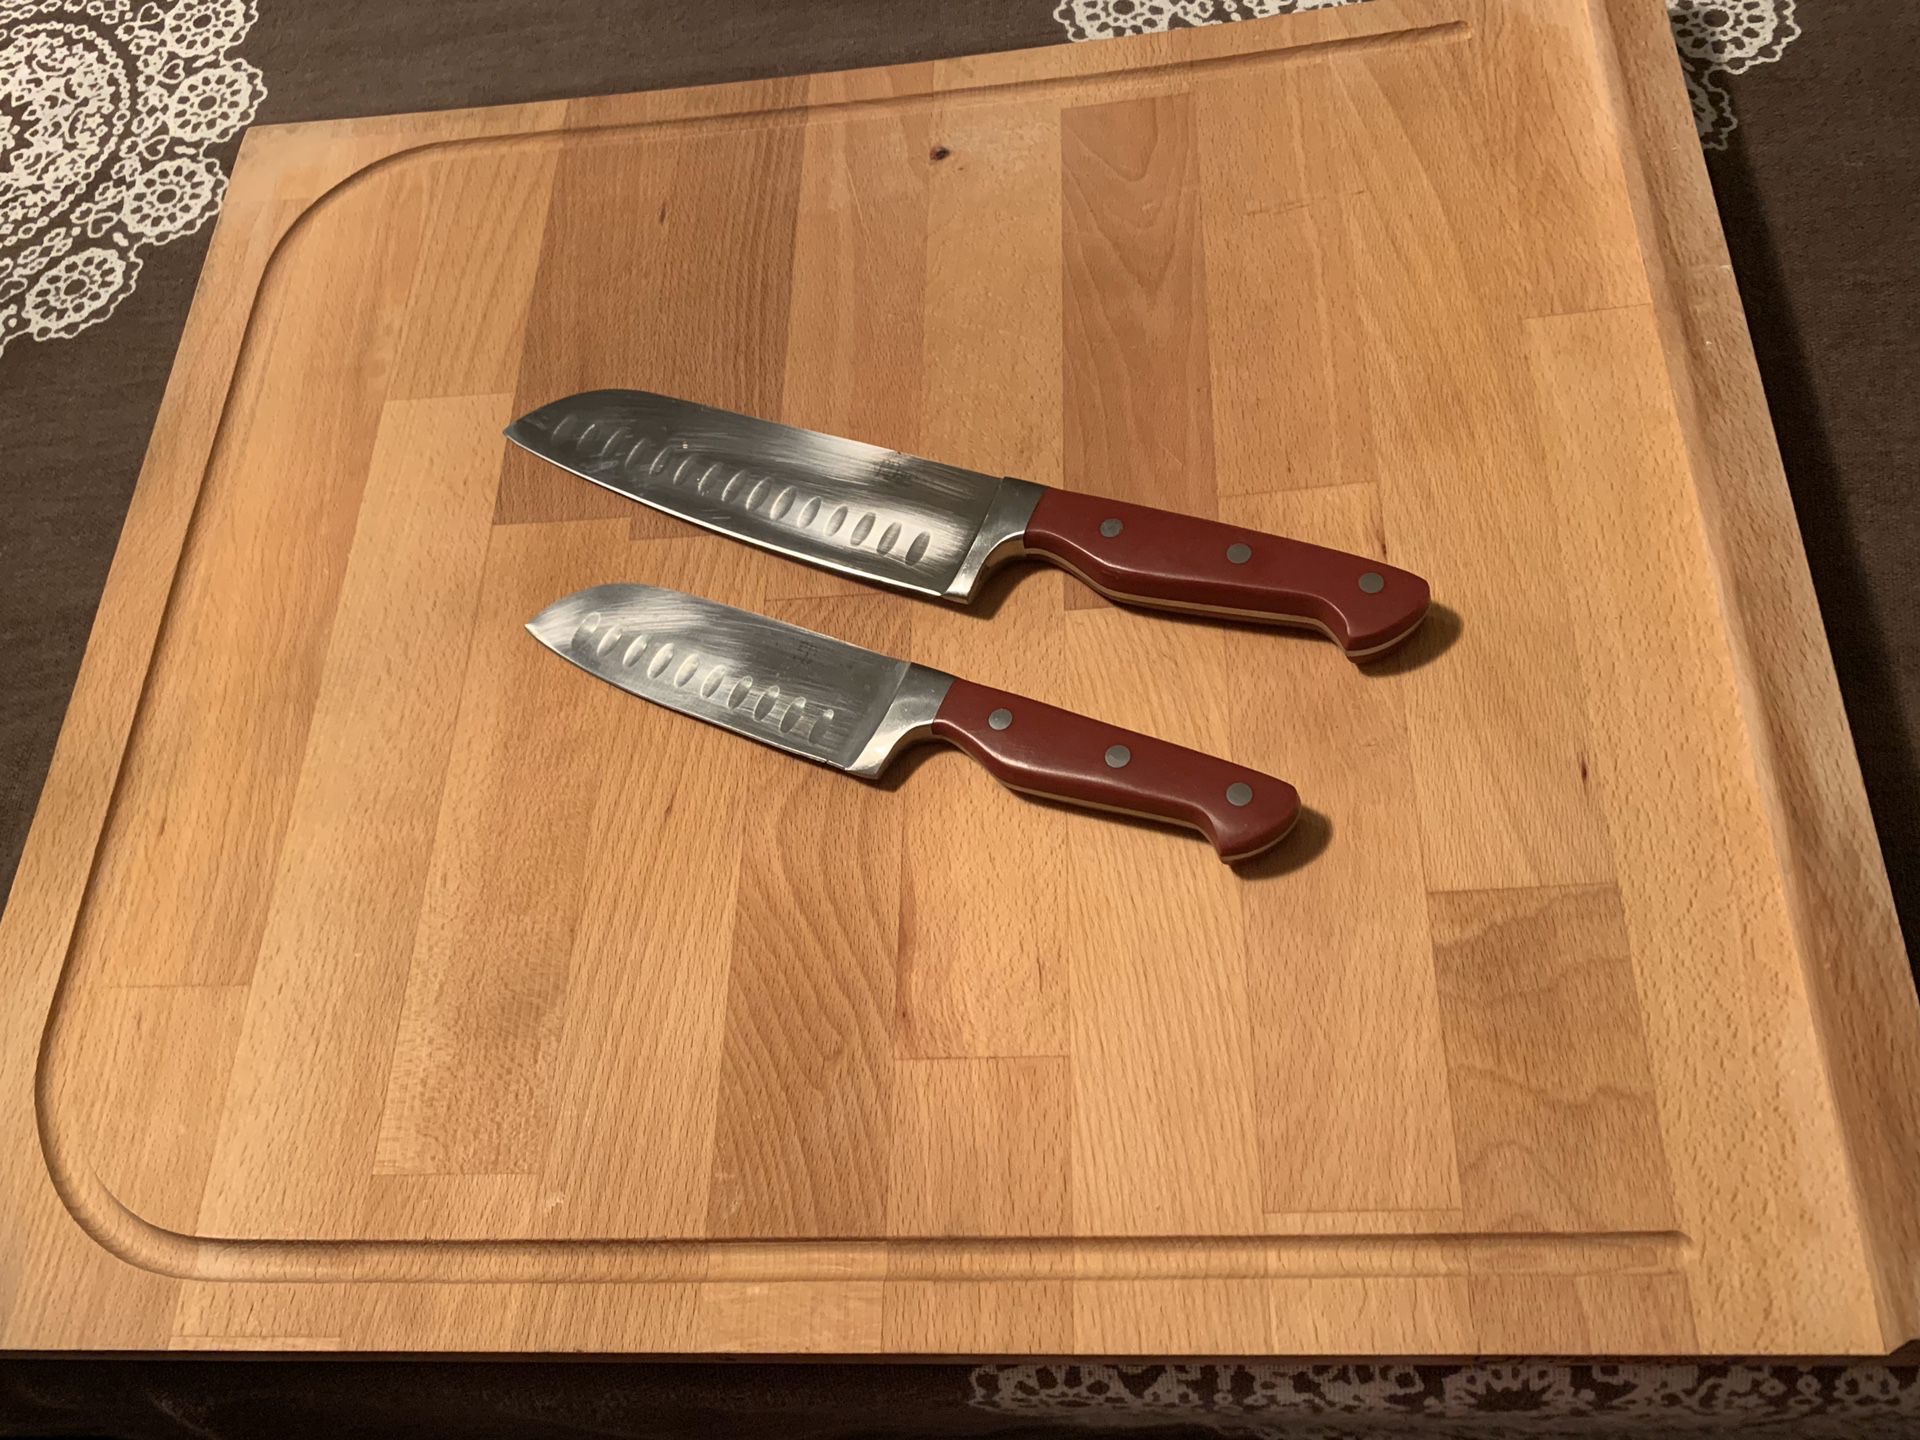 Large cutting board and knives